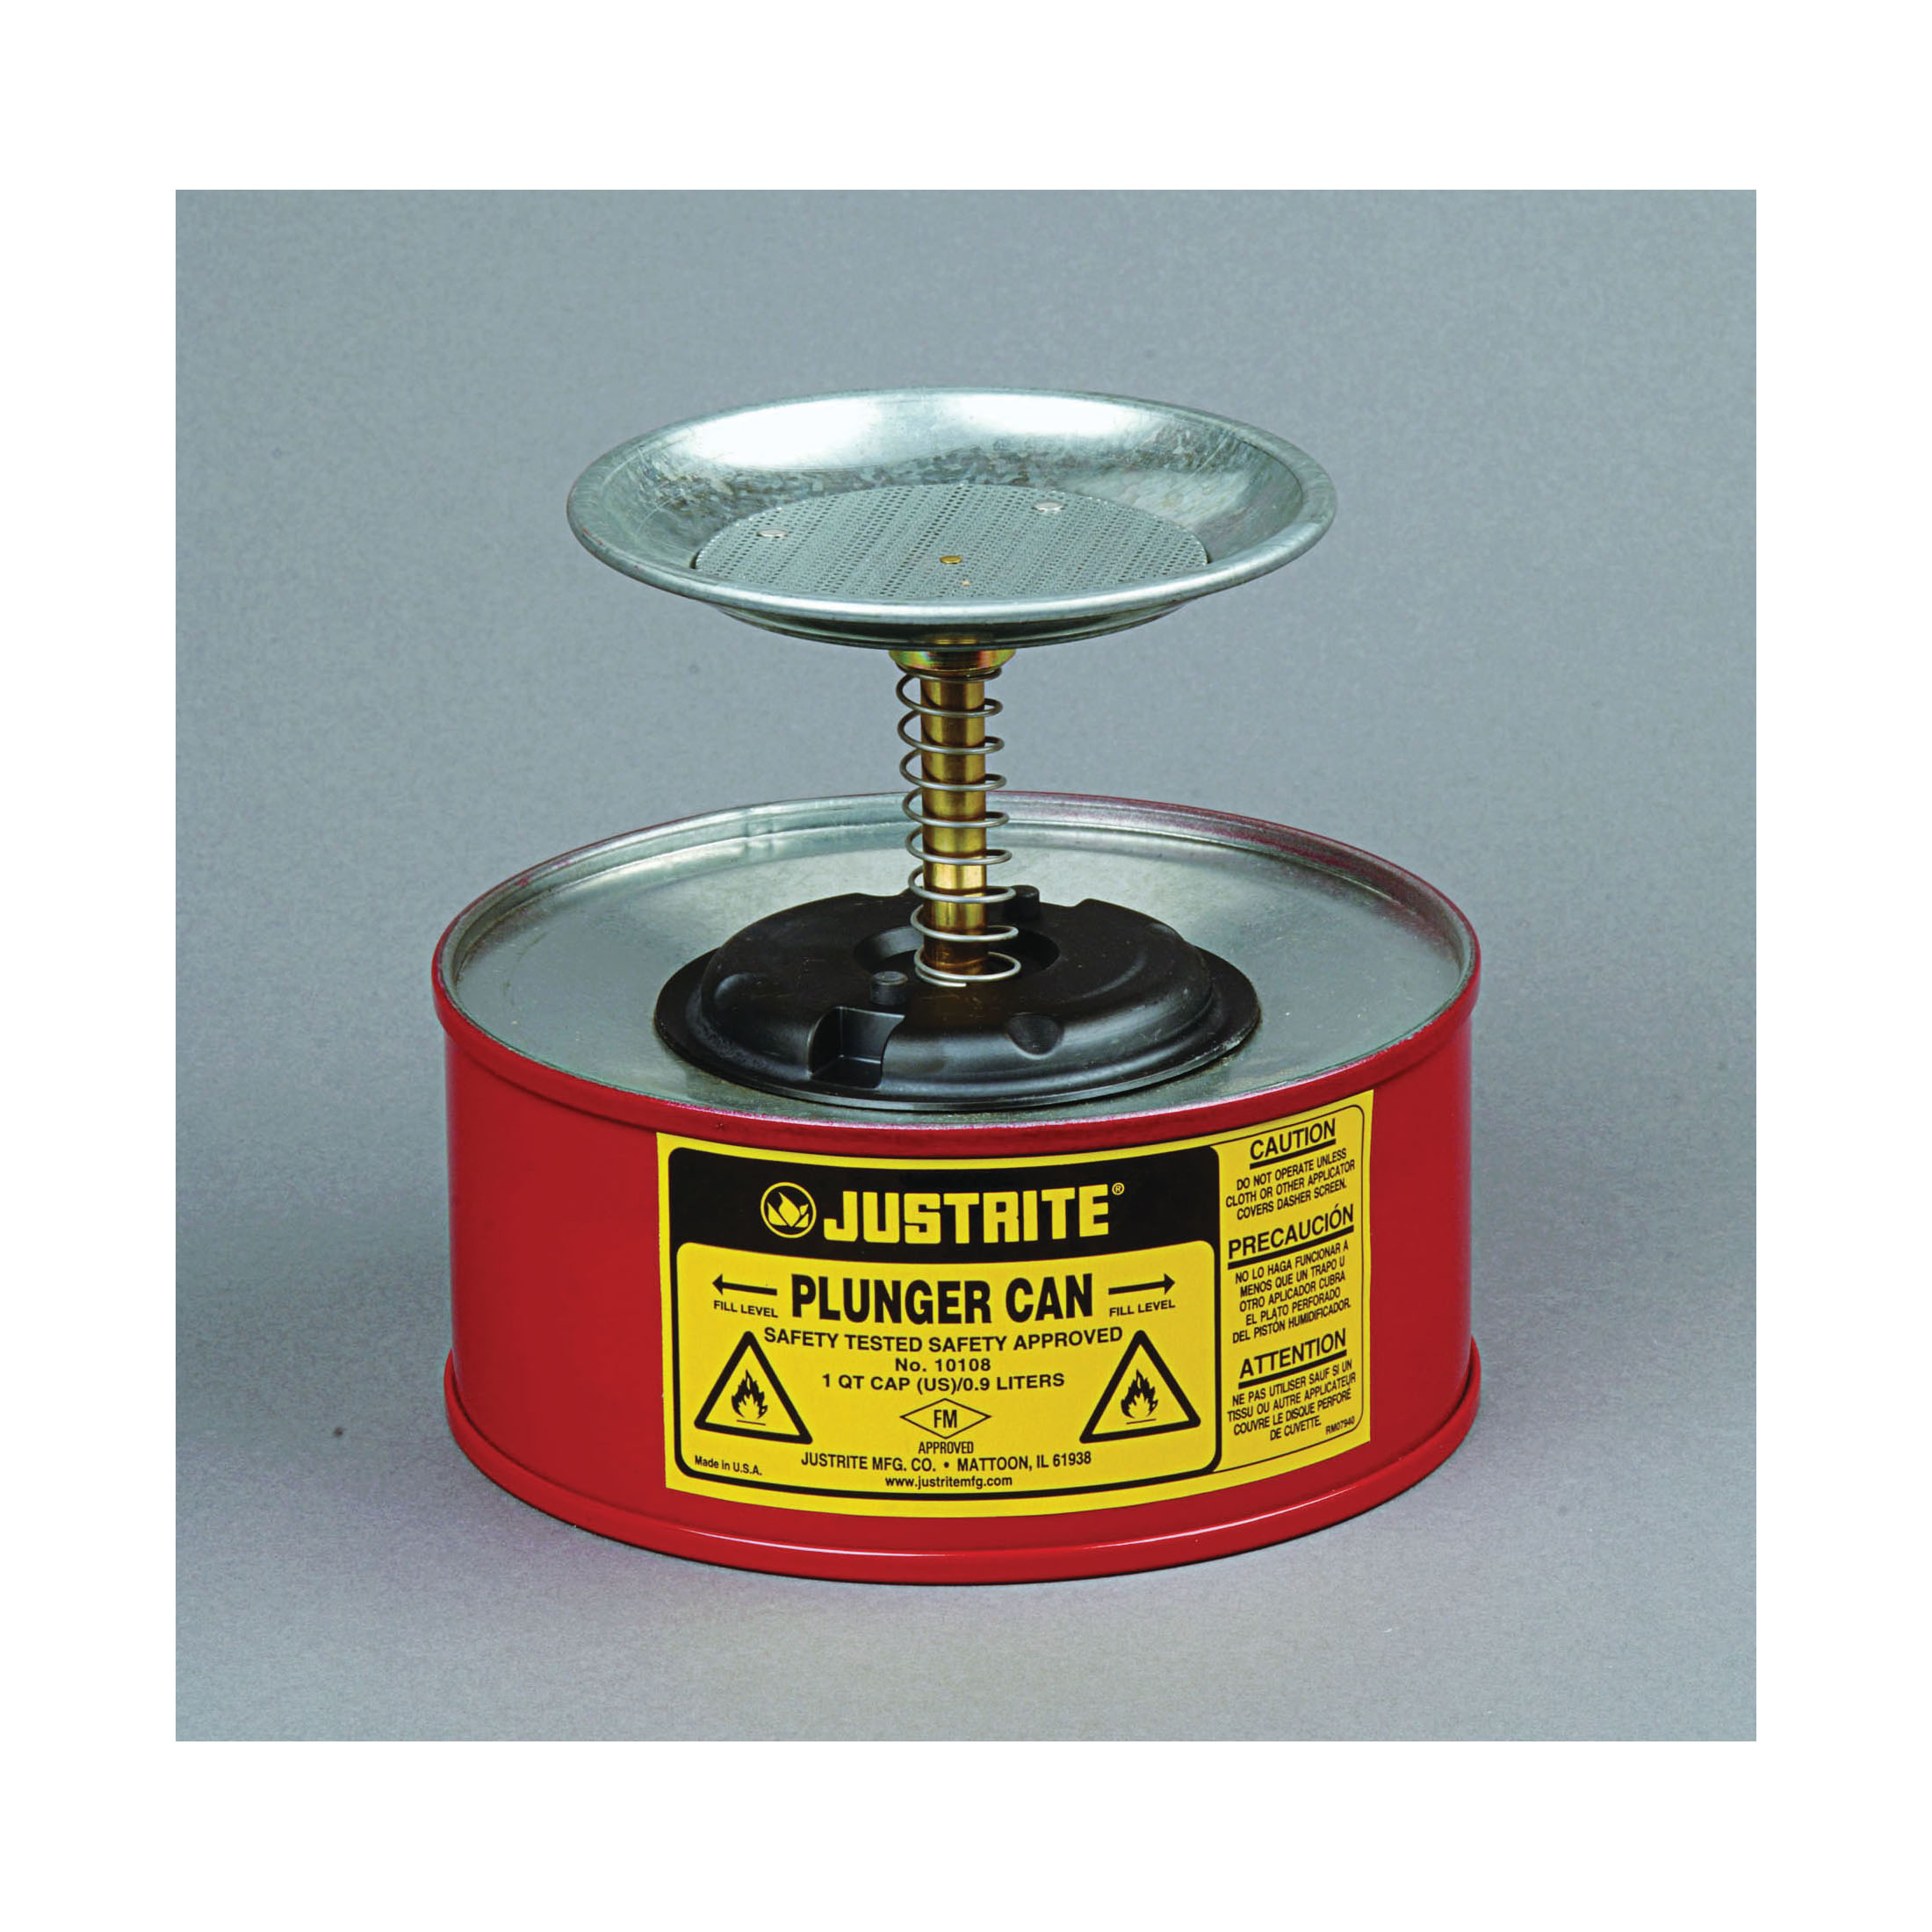 Justrite® 10008 Plunger Dispensing Can, 1 pt, Steel, Red, Brass/Ryton® Plunger, 2-3/4 in Dia Dasher Plate